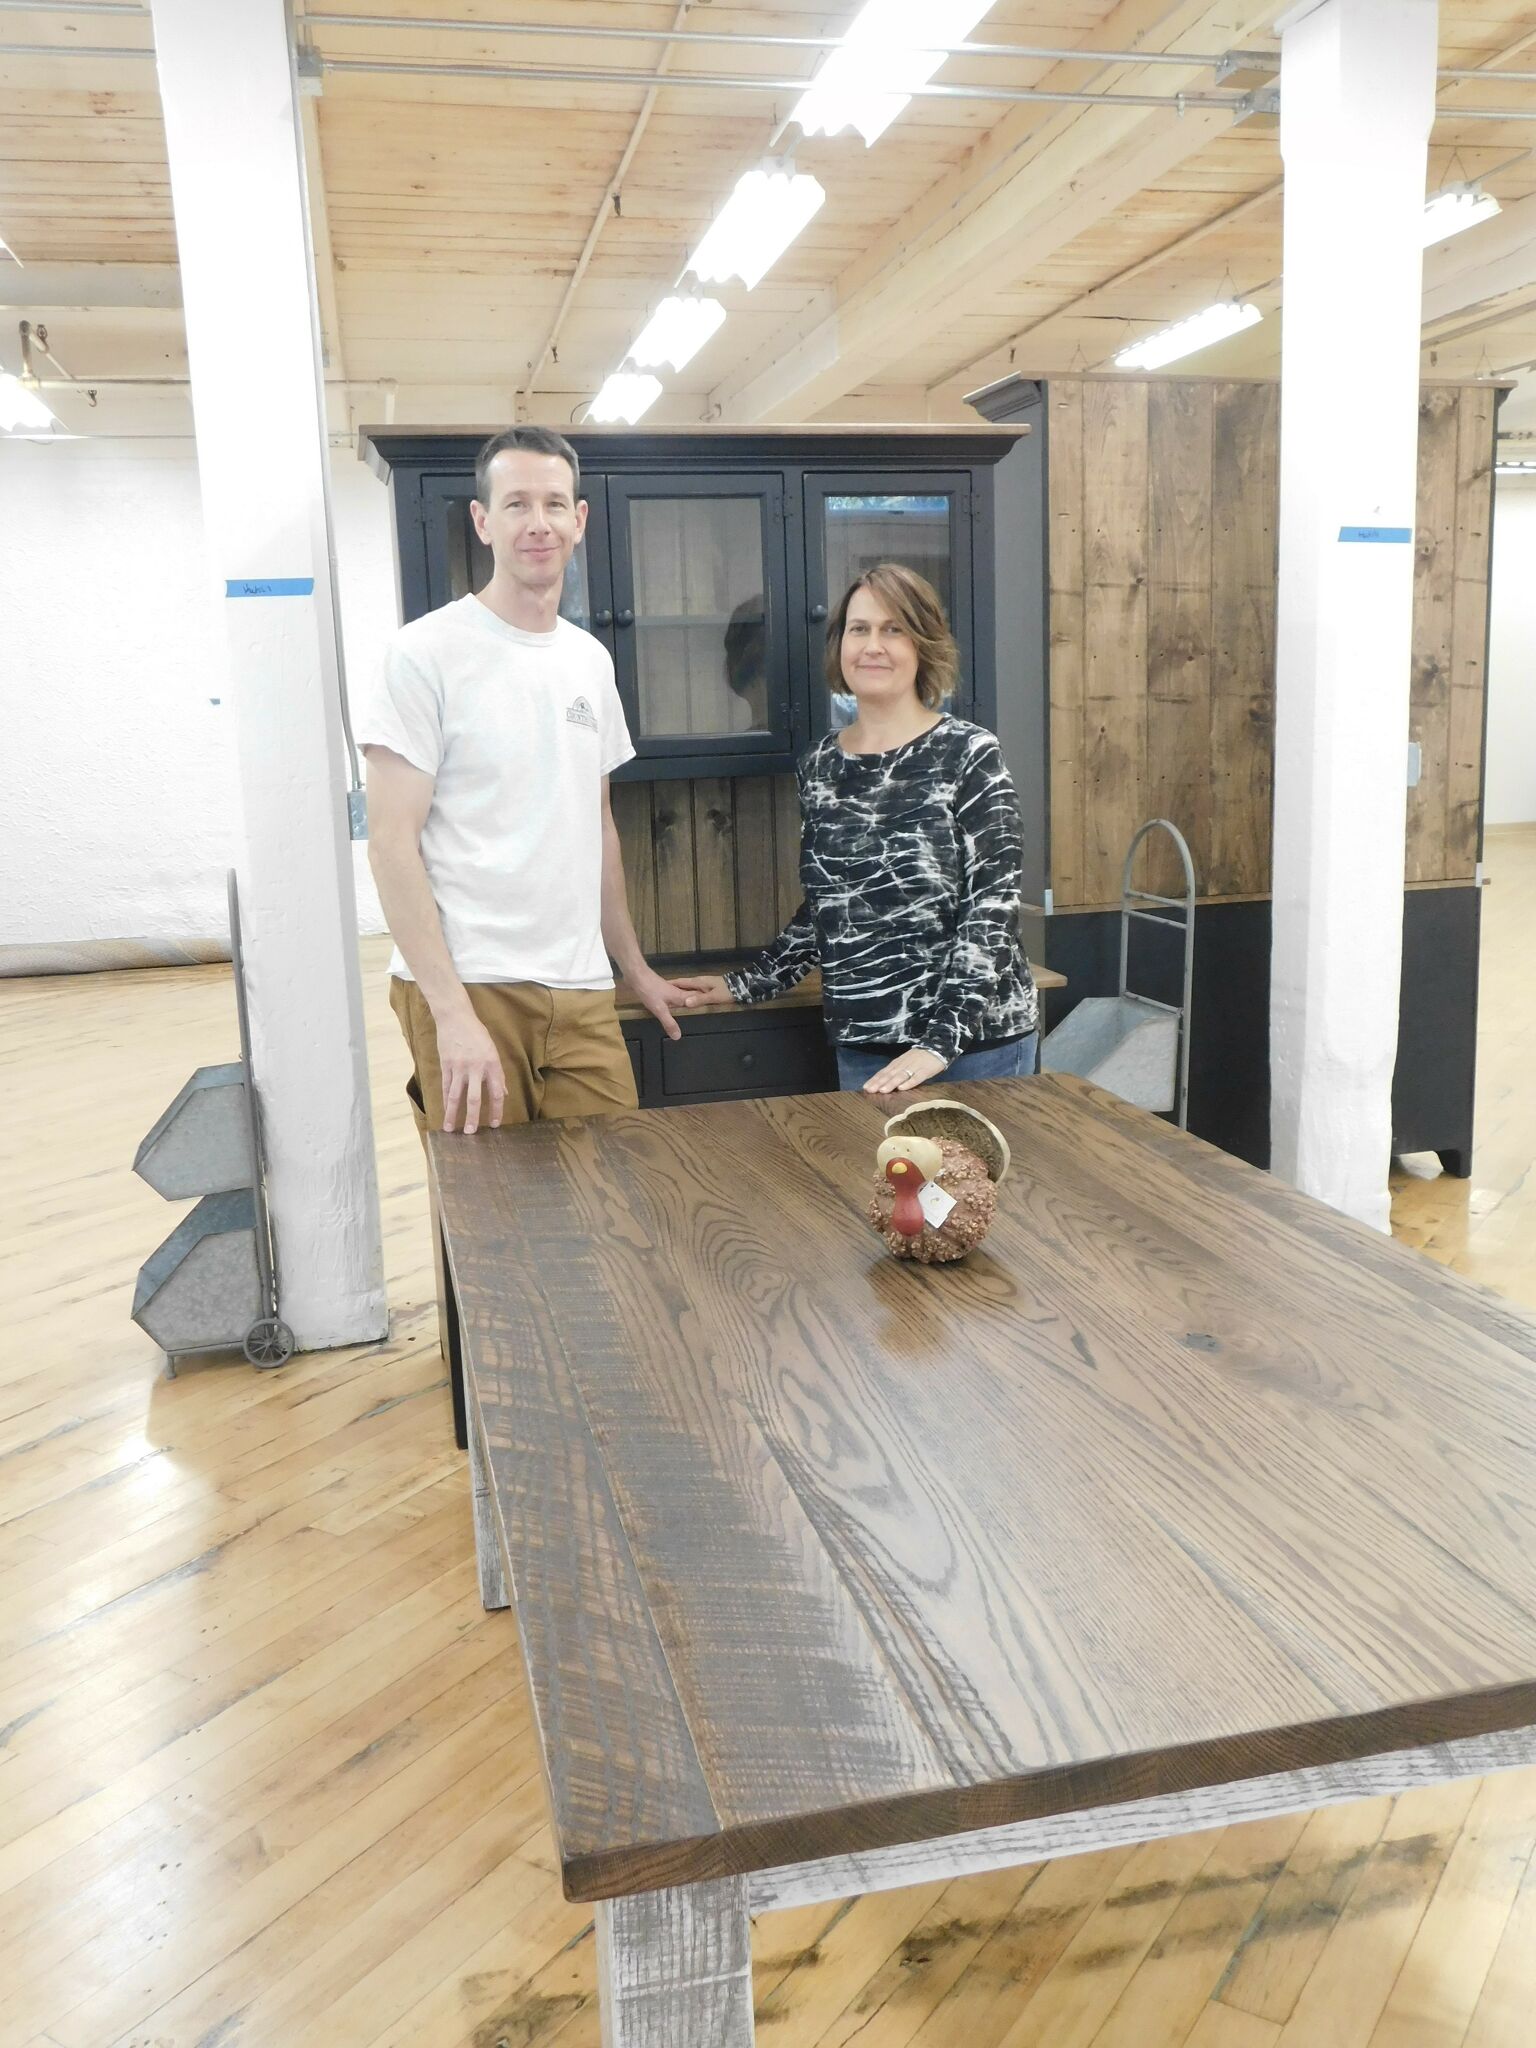 New Hartford welcomes furniture store from Collinsville